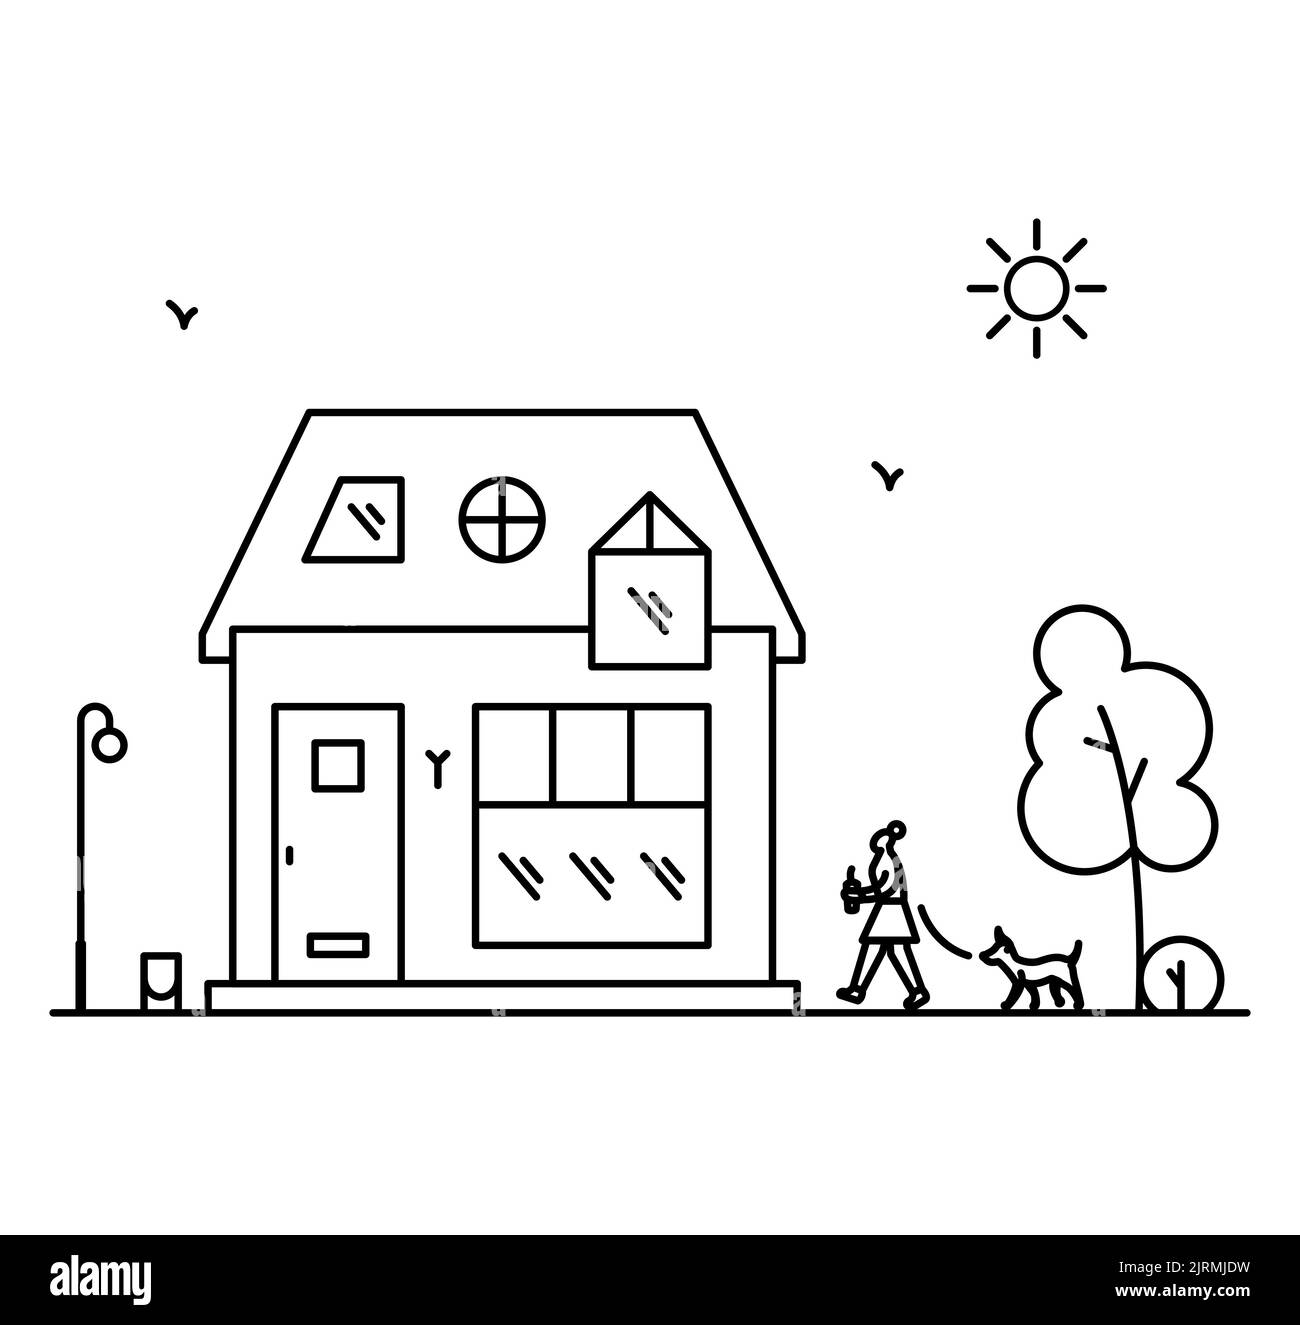 Neighborhood line art picture. Woman walking with the dog. Stock Vector